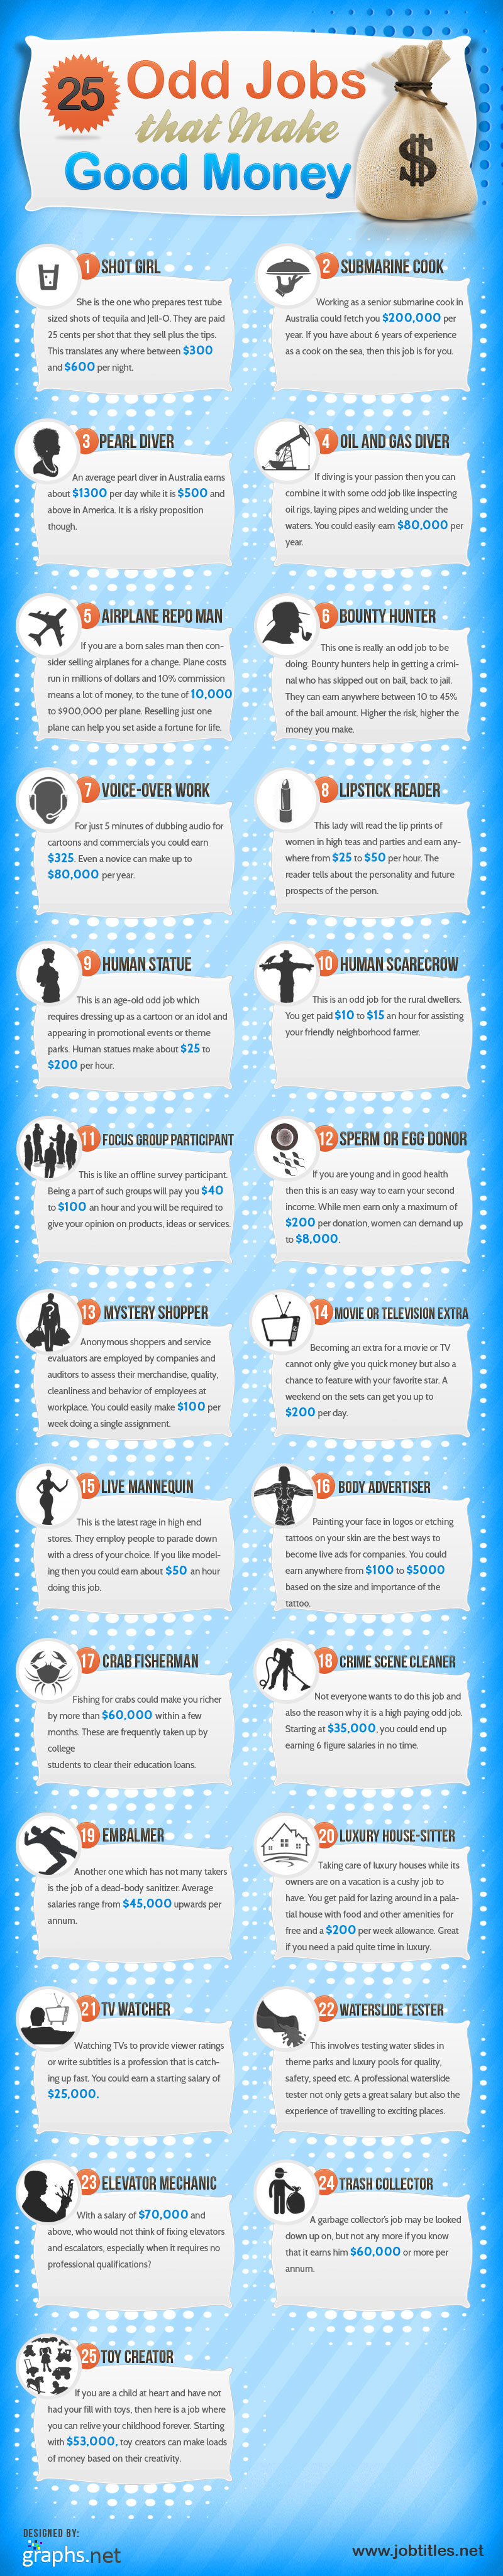 Odd Jobs with High Pay-Infographic